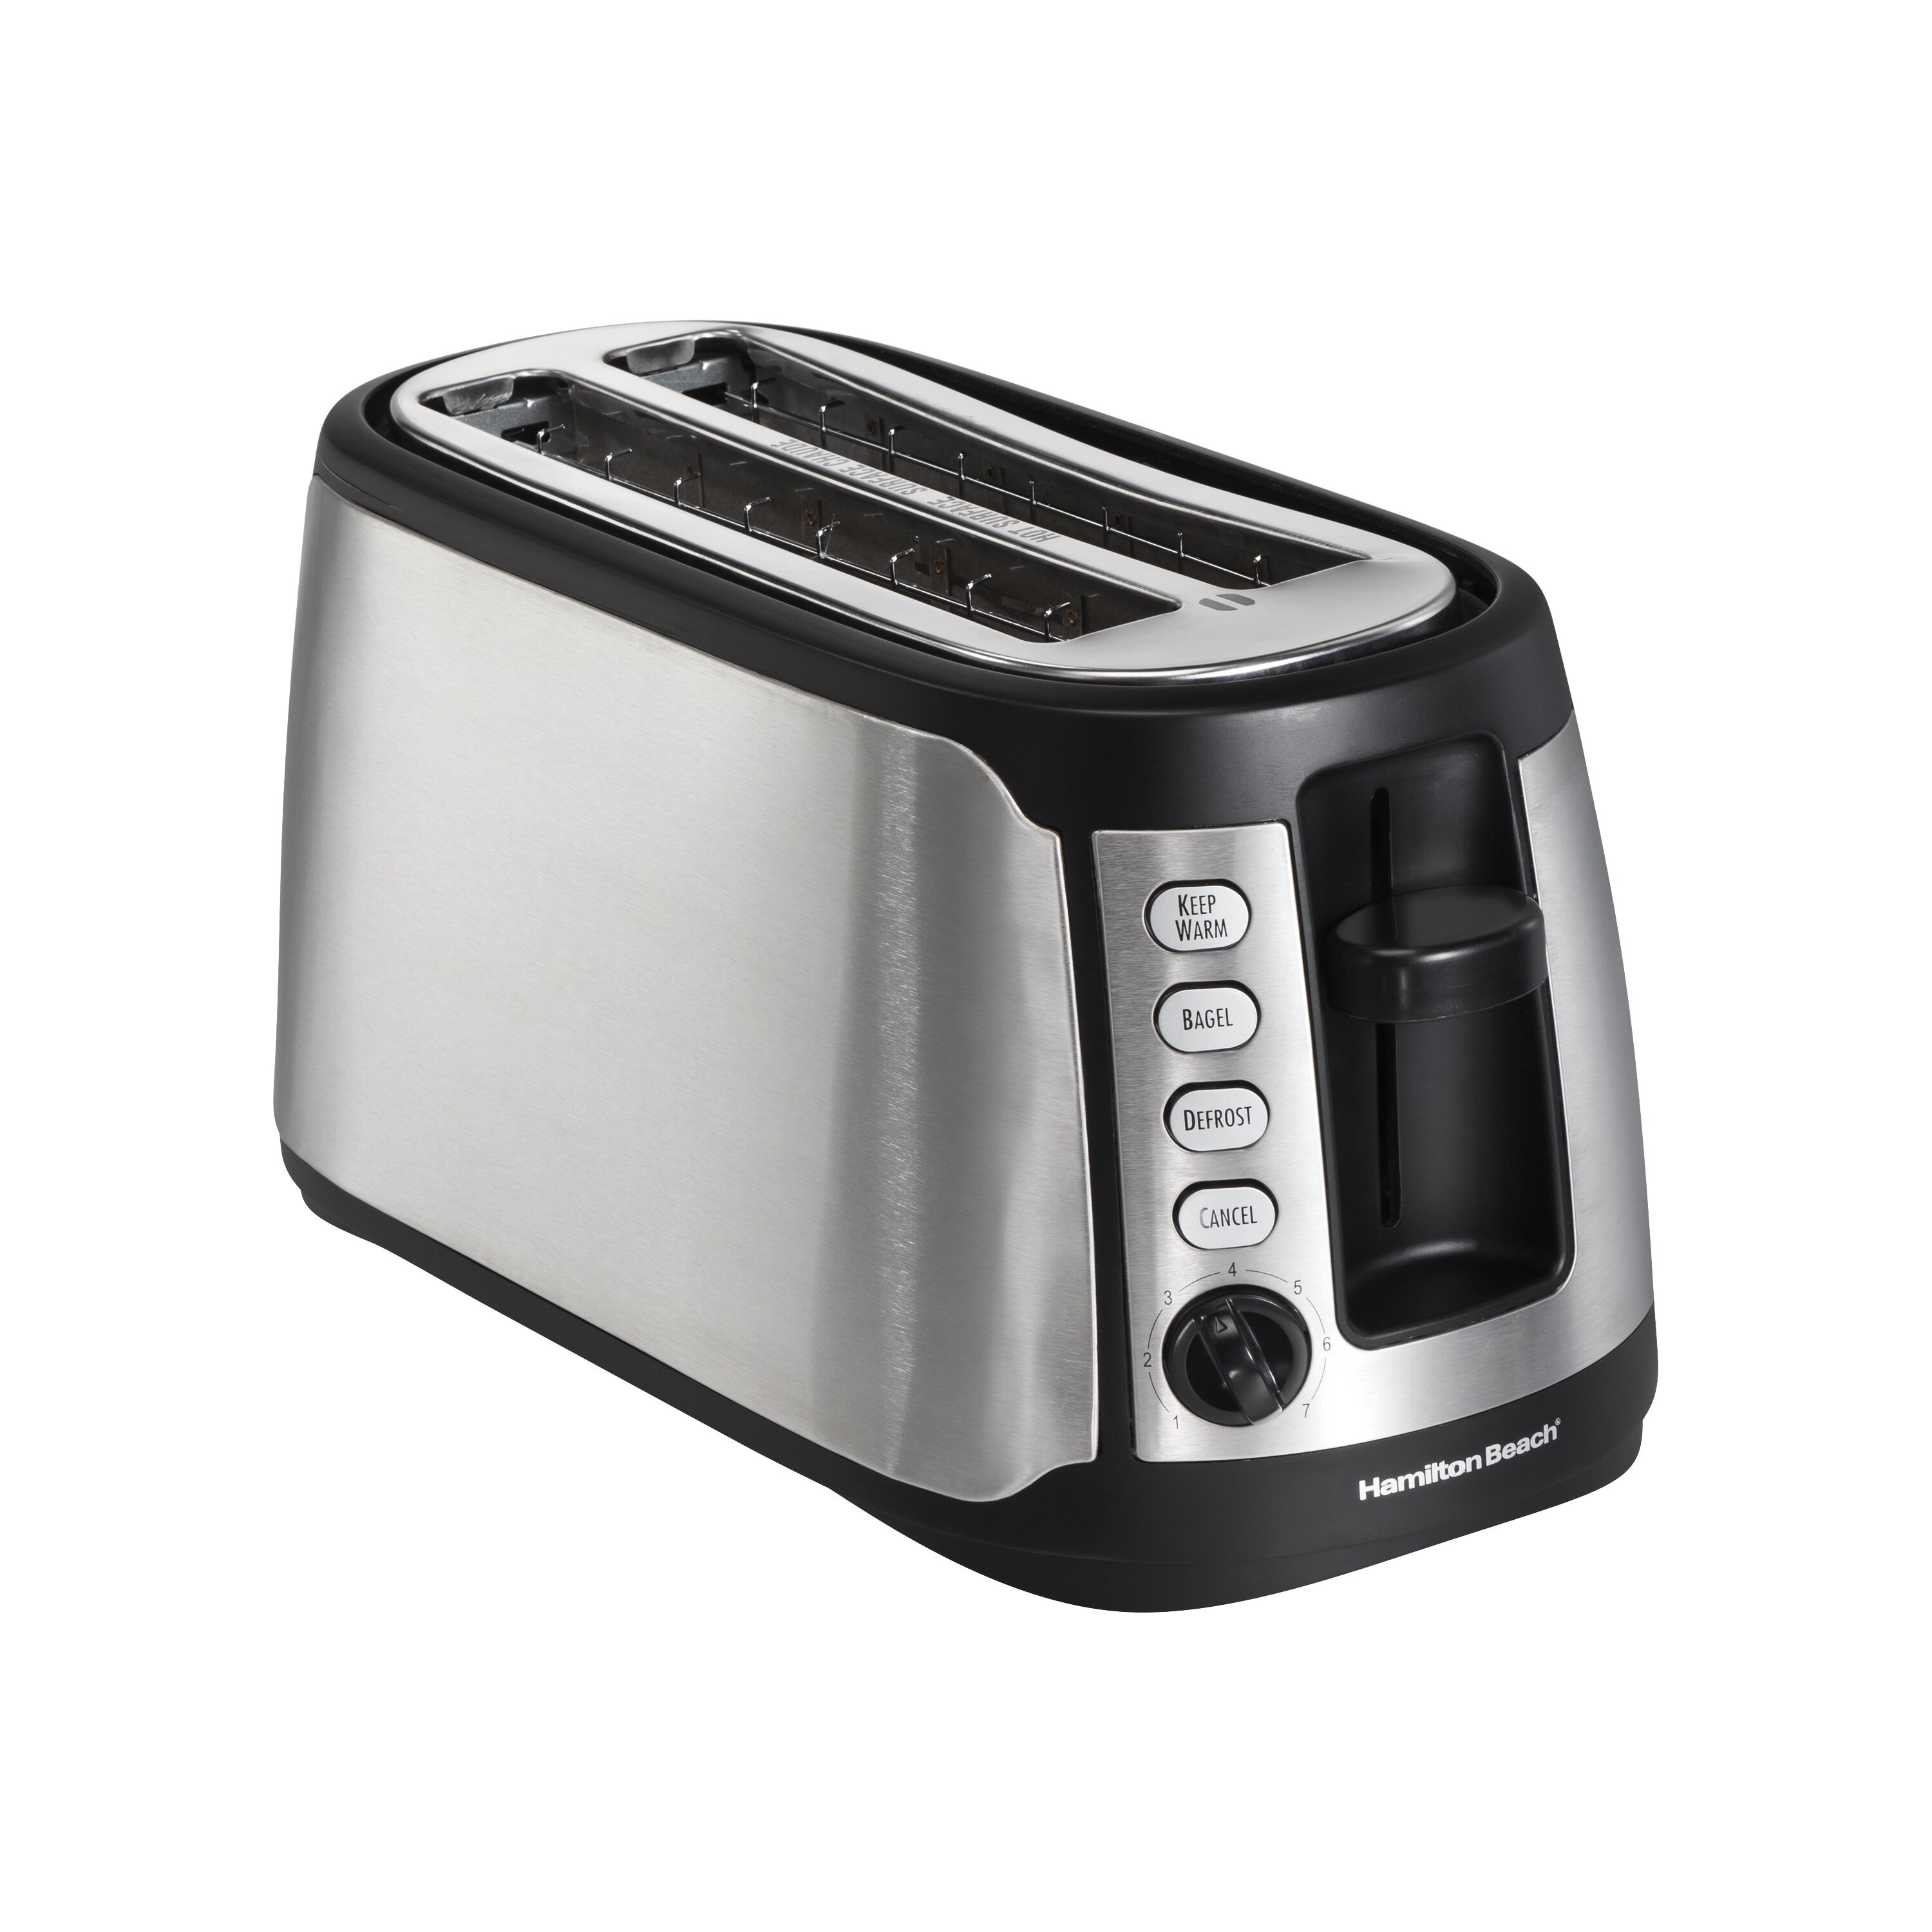 Oster 4 Slice Long Slot Toaster Reviews